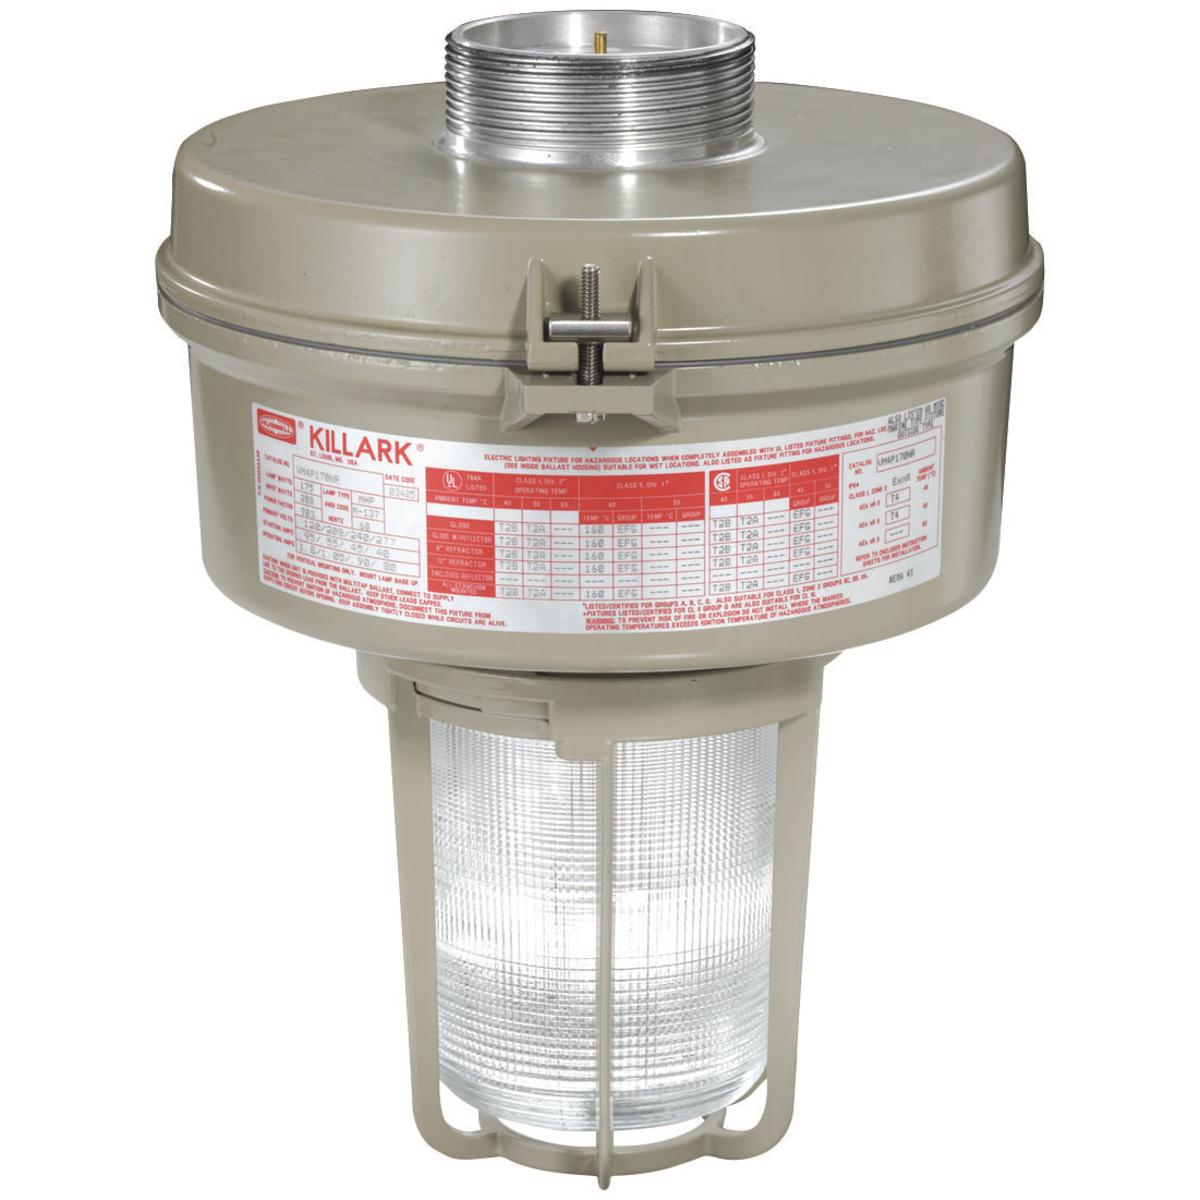 Hubbell VM3H070EZR5G VM3 Series - 70W Metal Halide Quadri-Volt - EZ Mount Adapter -  Type V Glass Refractor and Guard  ; Ballast tank and splice box – corrosion resistant copper-free aluminum alloy with baked powder epoxy/polyester finish, electrostatically applied for comple